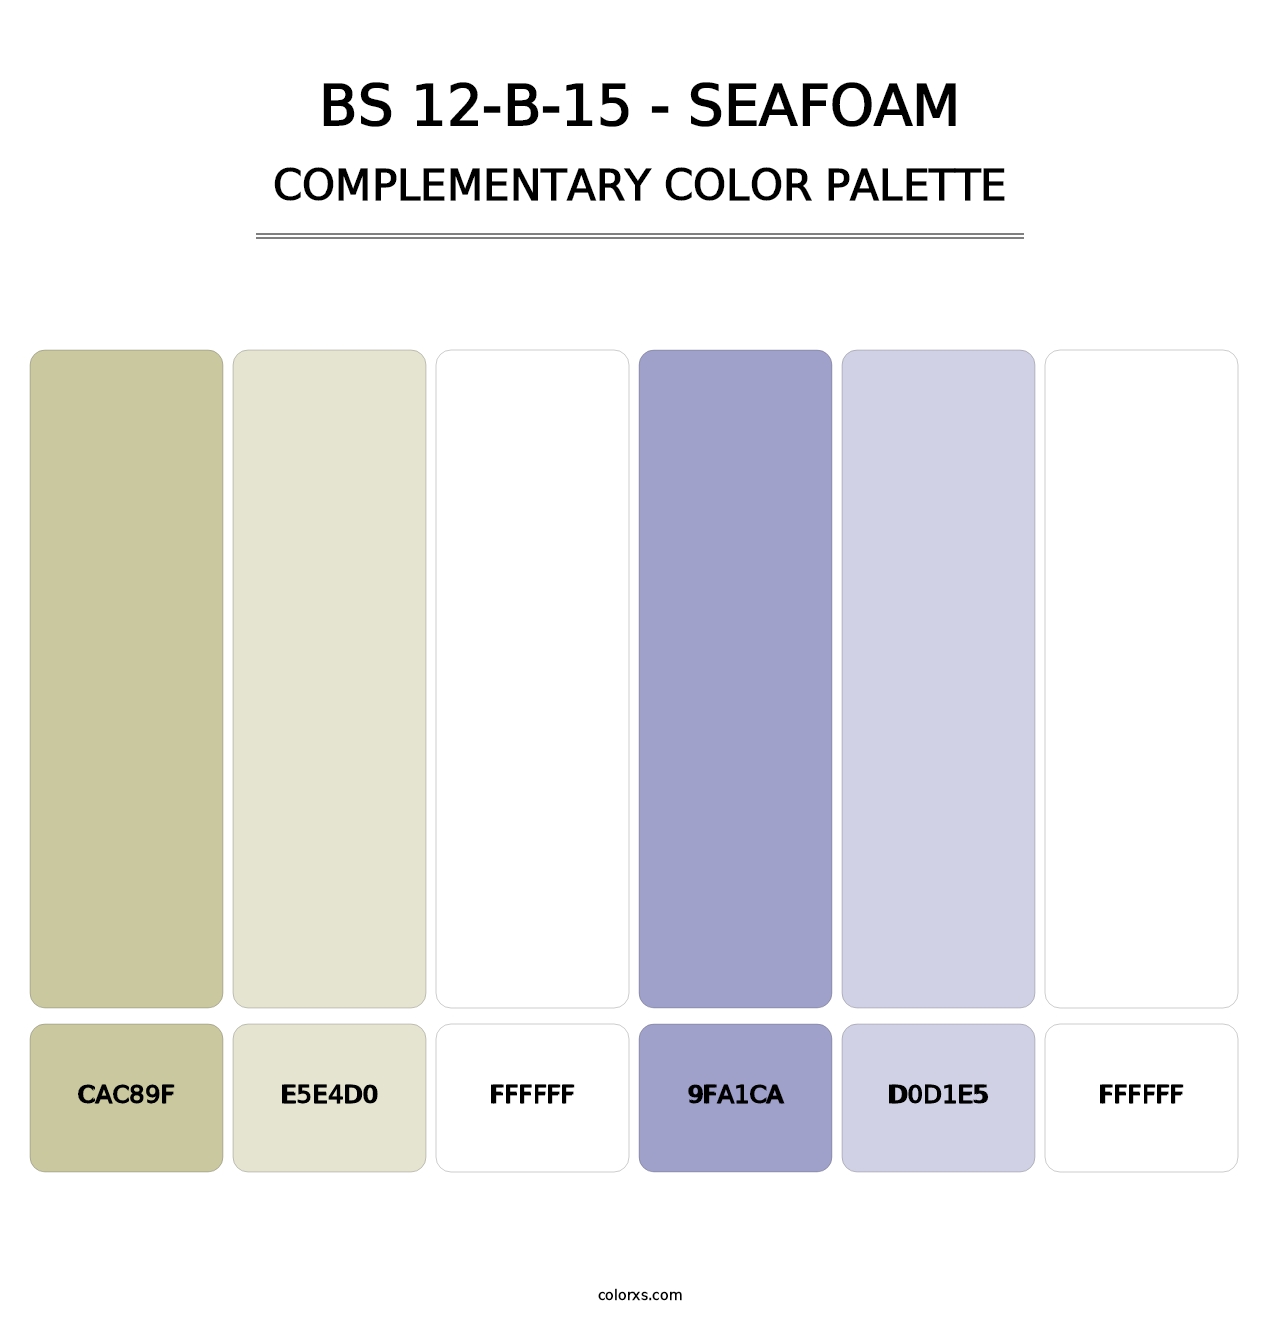 BS 12-B-15 - Seafoam - Complementary Color Palette